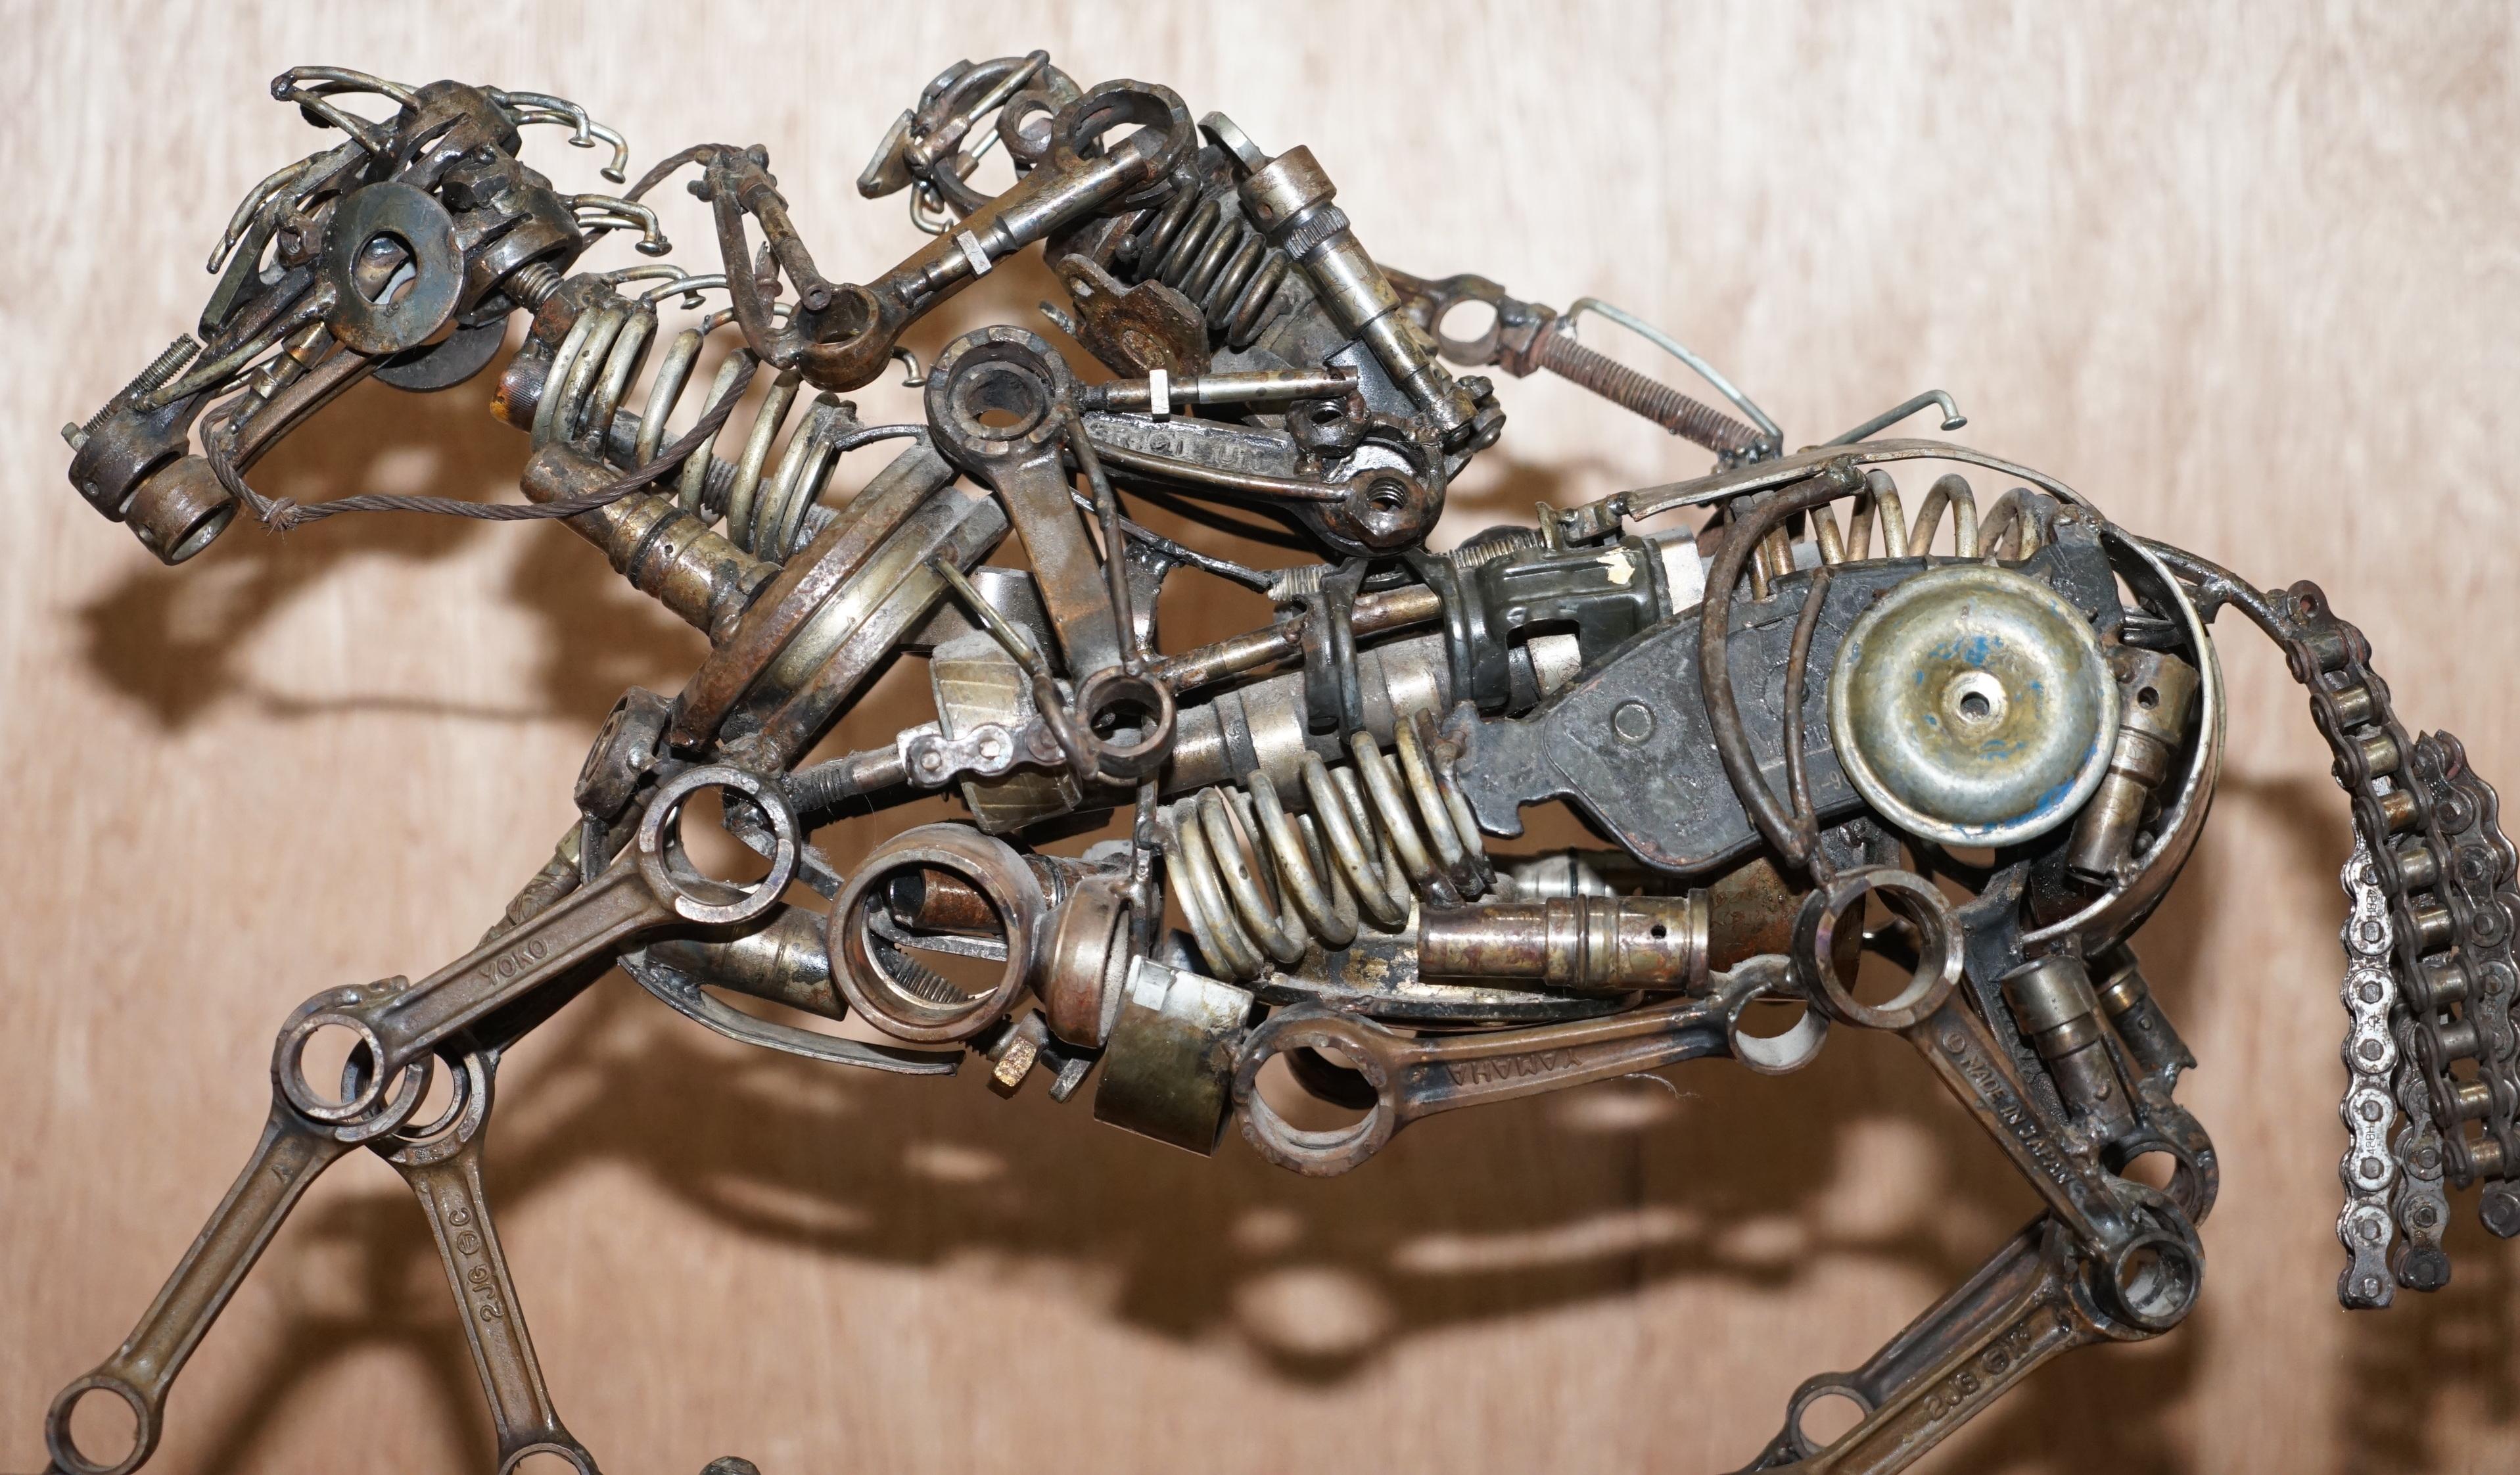 Rare Pair of Motorcycle Parts Scrap Metal Made Sculptures of Solders on Horses 4